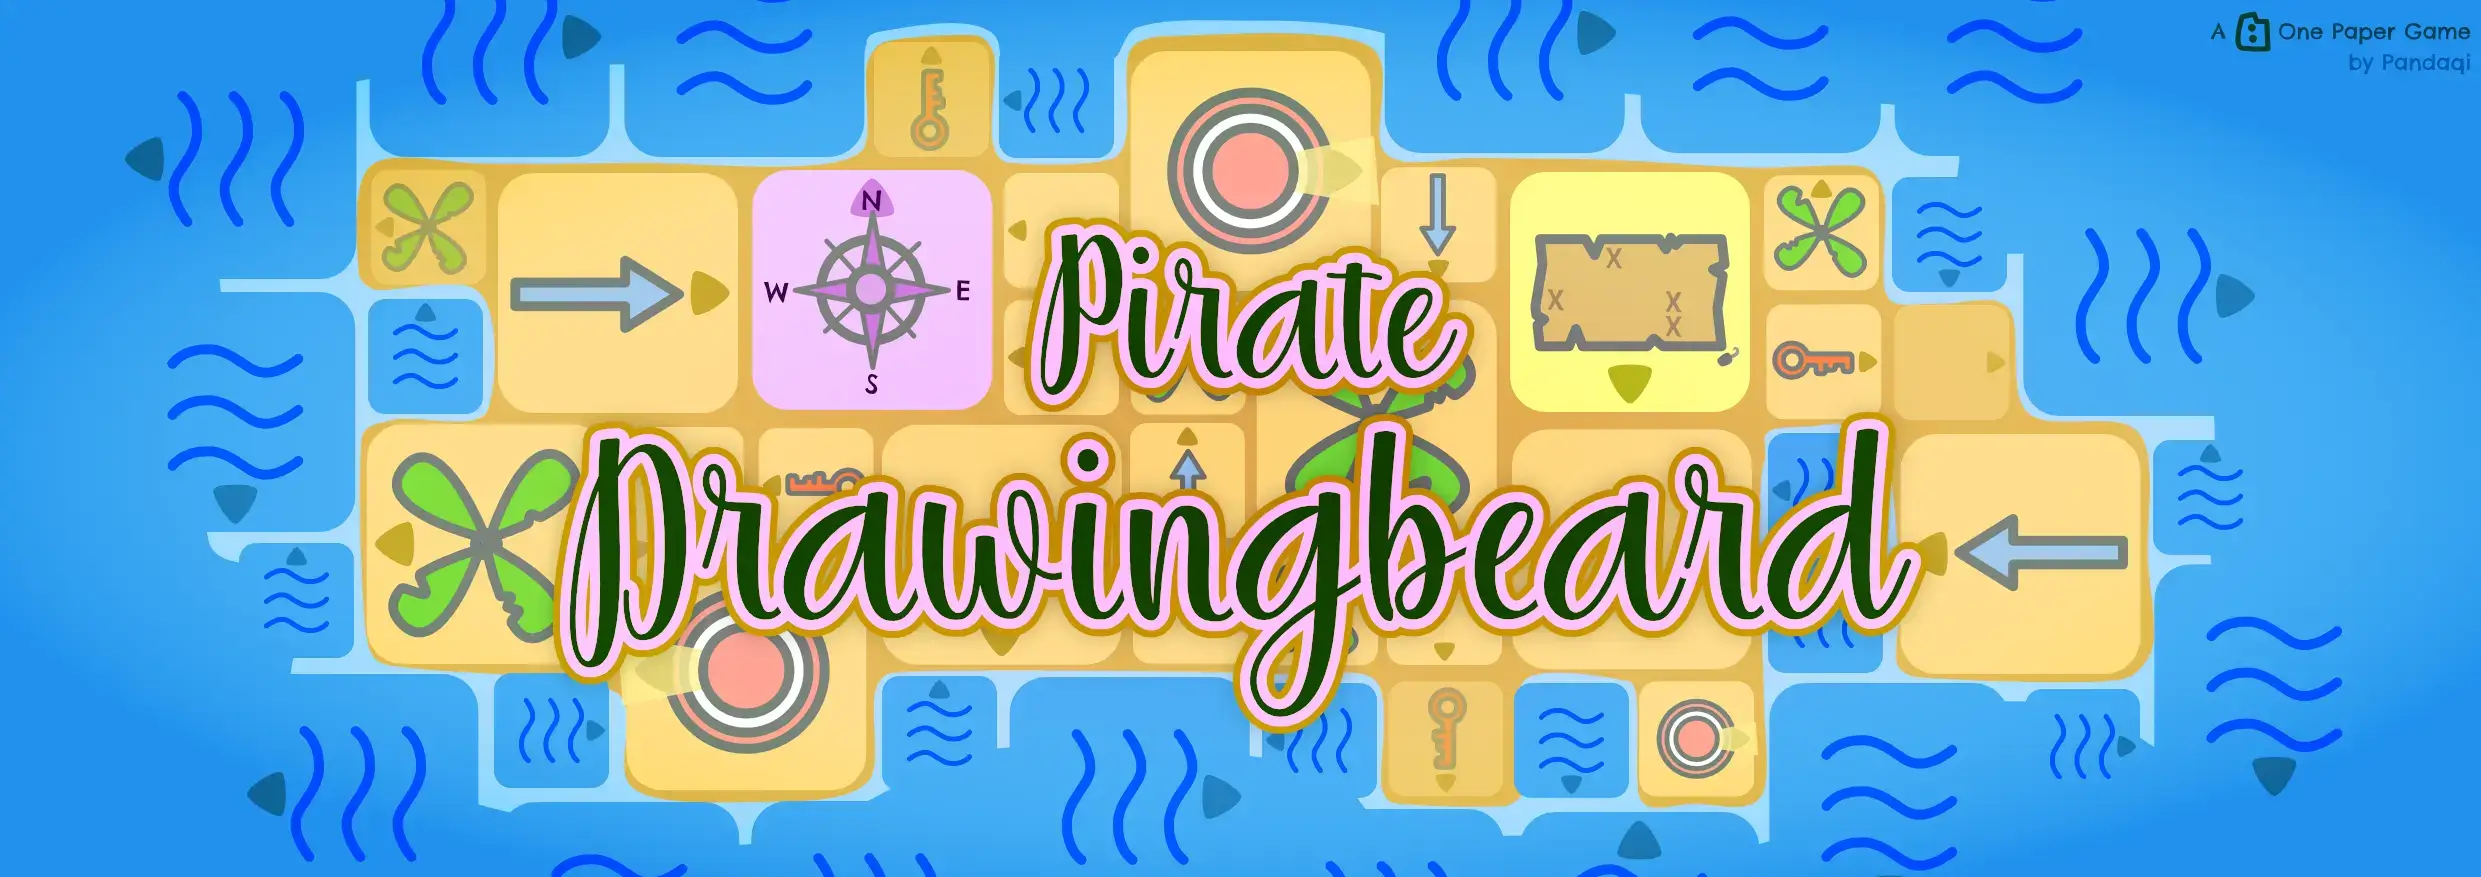 Thumbnail / Header for article: The Pirate Games